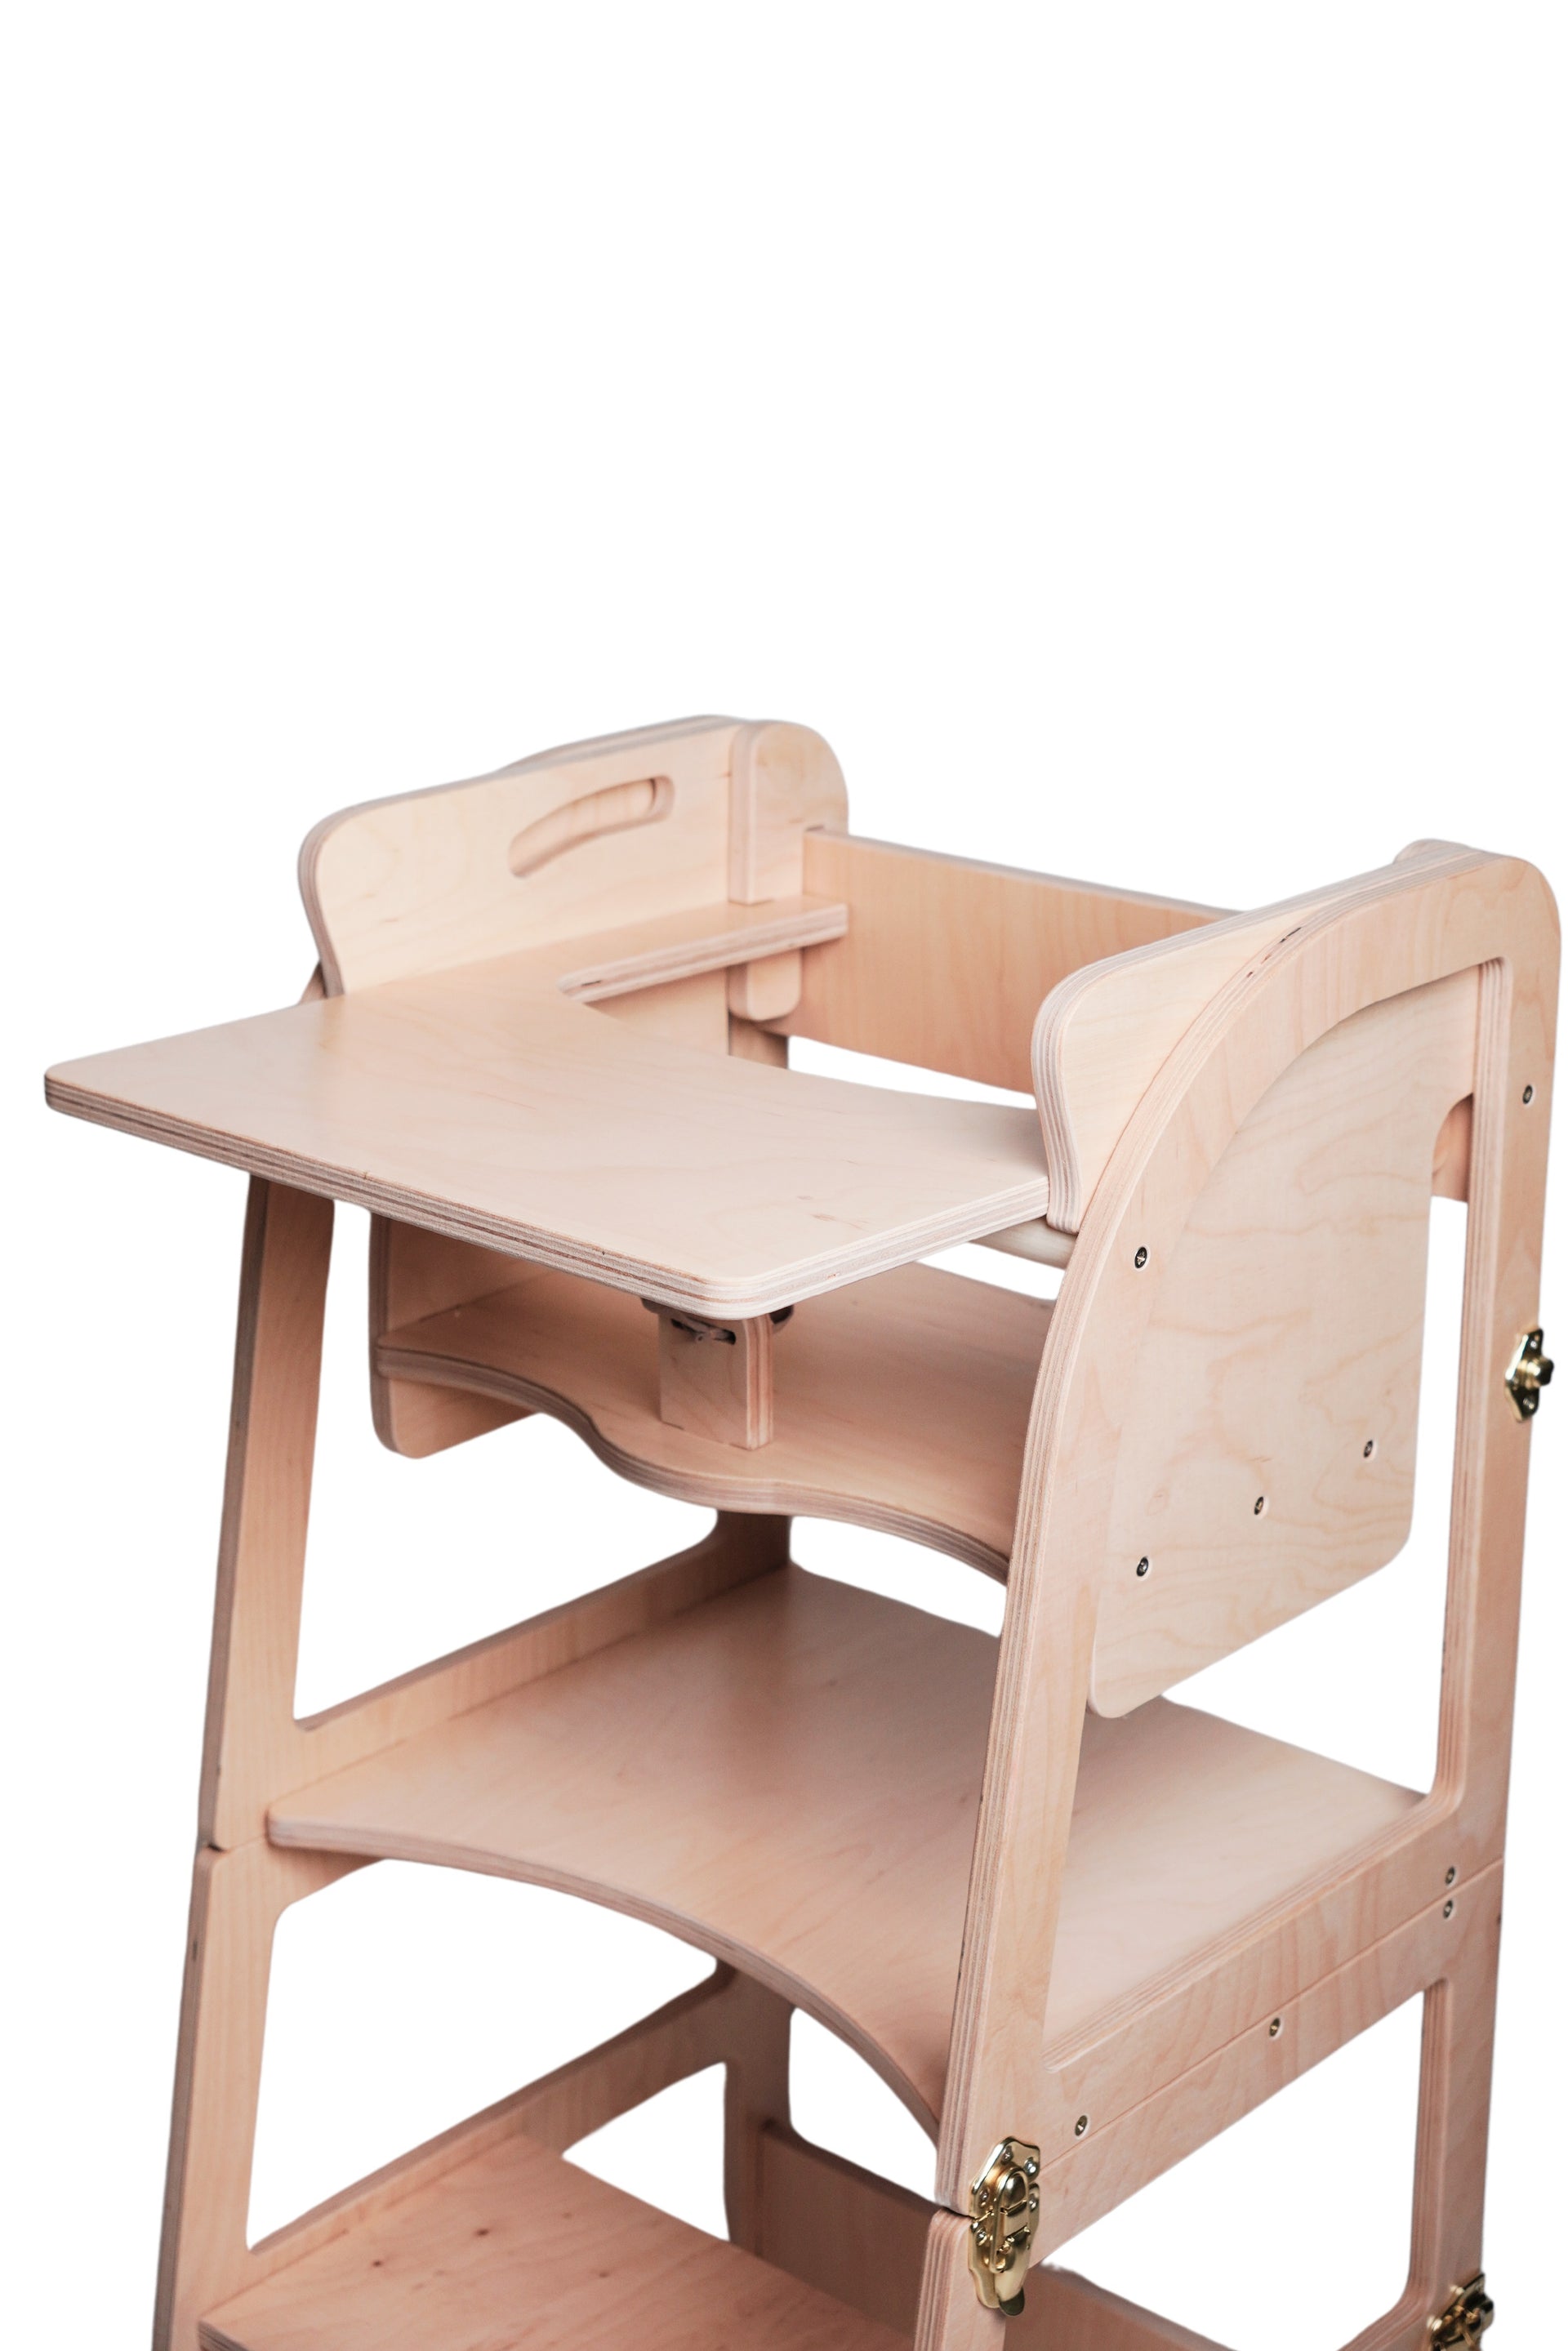 Addon2 - Tray for high chair